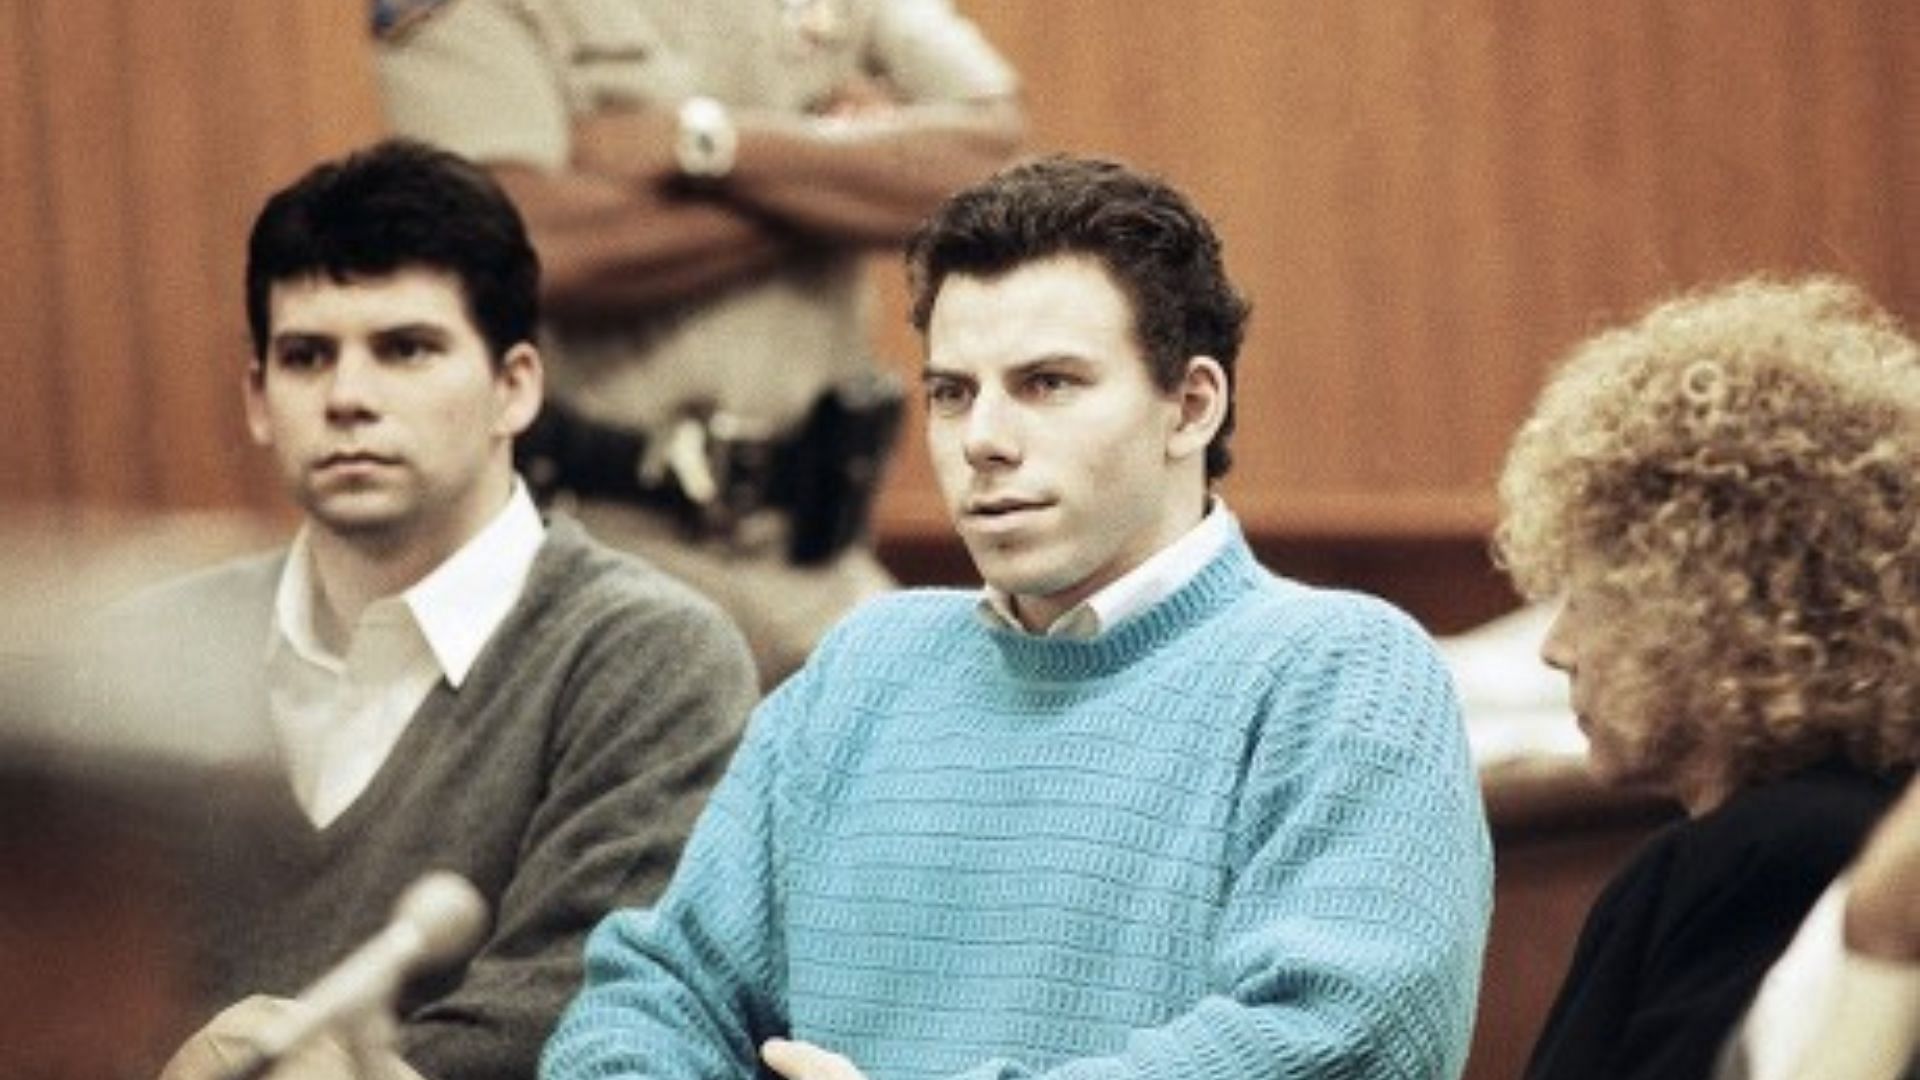 The Menendez Brothers, Erik and Lyle, during the murder trial in the early 90s (Image via Shutterstock)